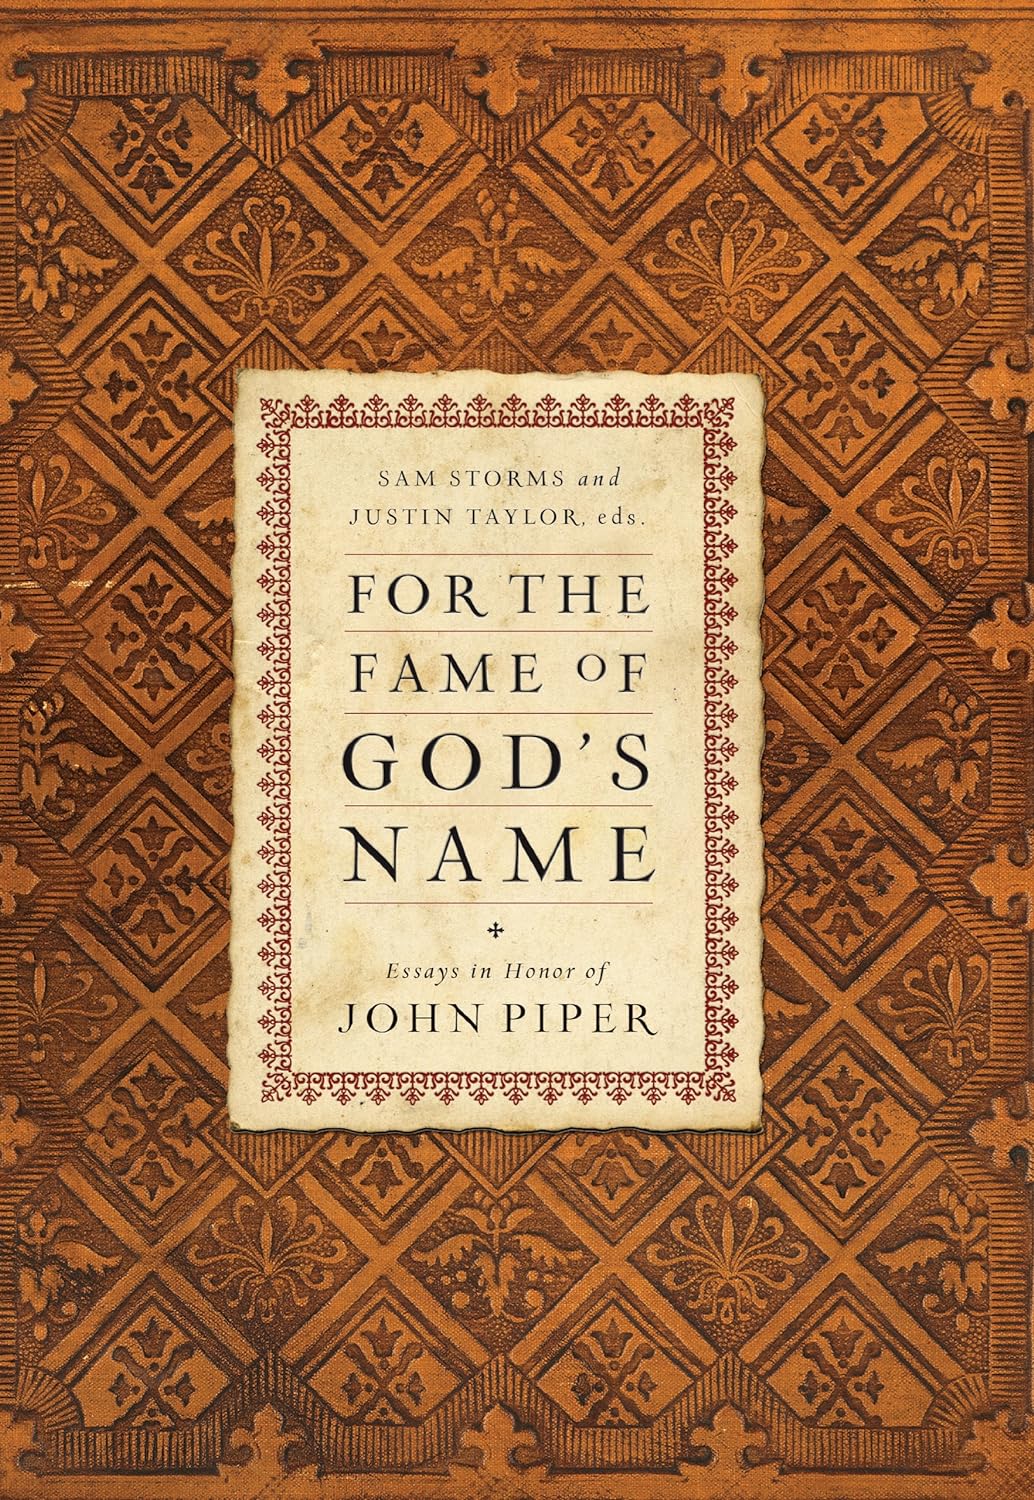 For the Fame of God's Name- Essays in Honor of John Piper